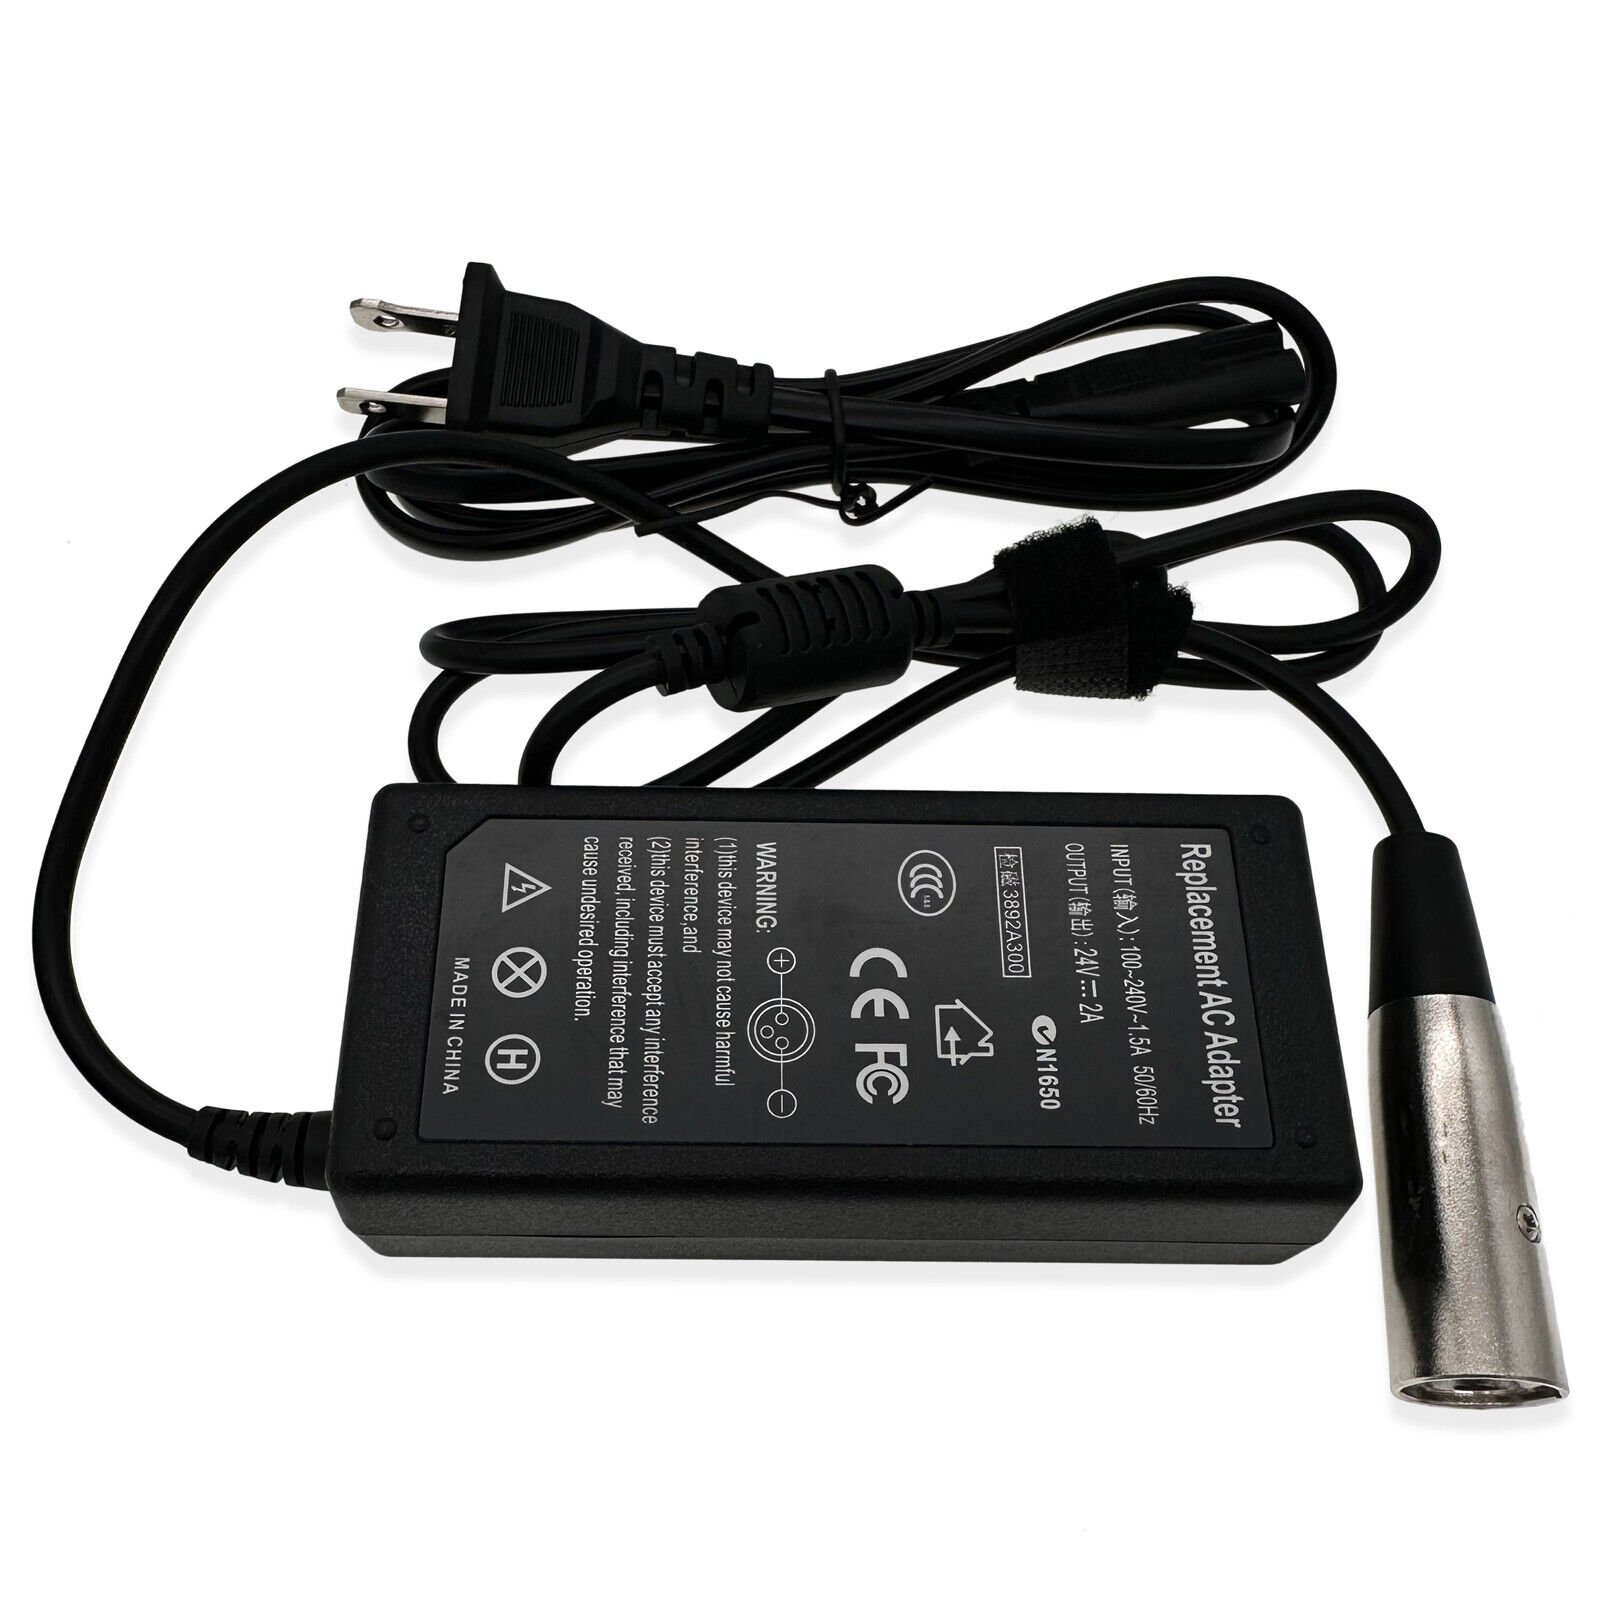 24V 2A Scooter Battery Charger For Currie e-ride ,PHAT FLYER SE, PHAT PHANTOM 24V 2A Scooter Battery Charger For Currie - Click Image to Close